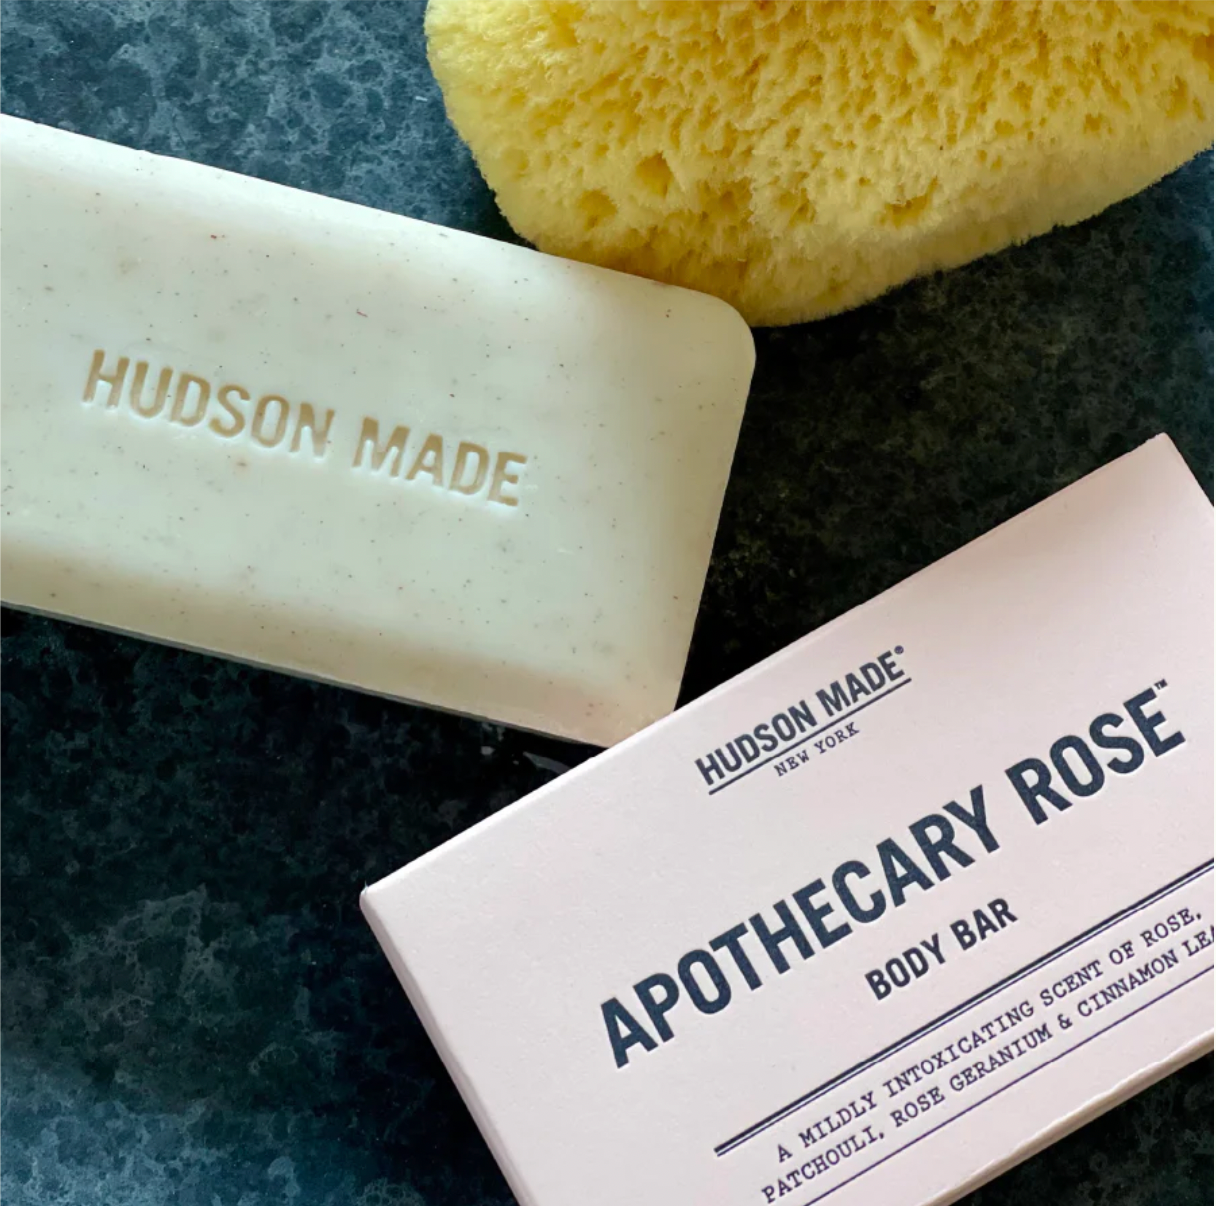 Apothecary rose deluxe gift box by Hudson Made